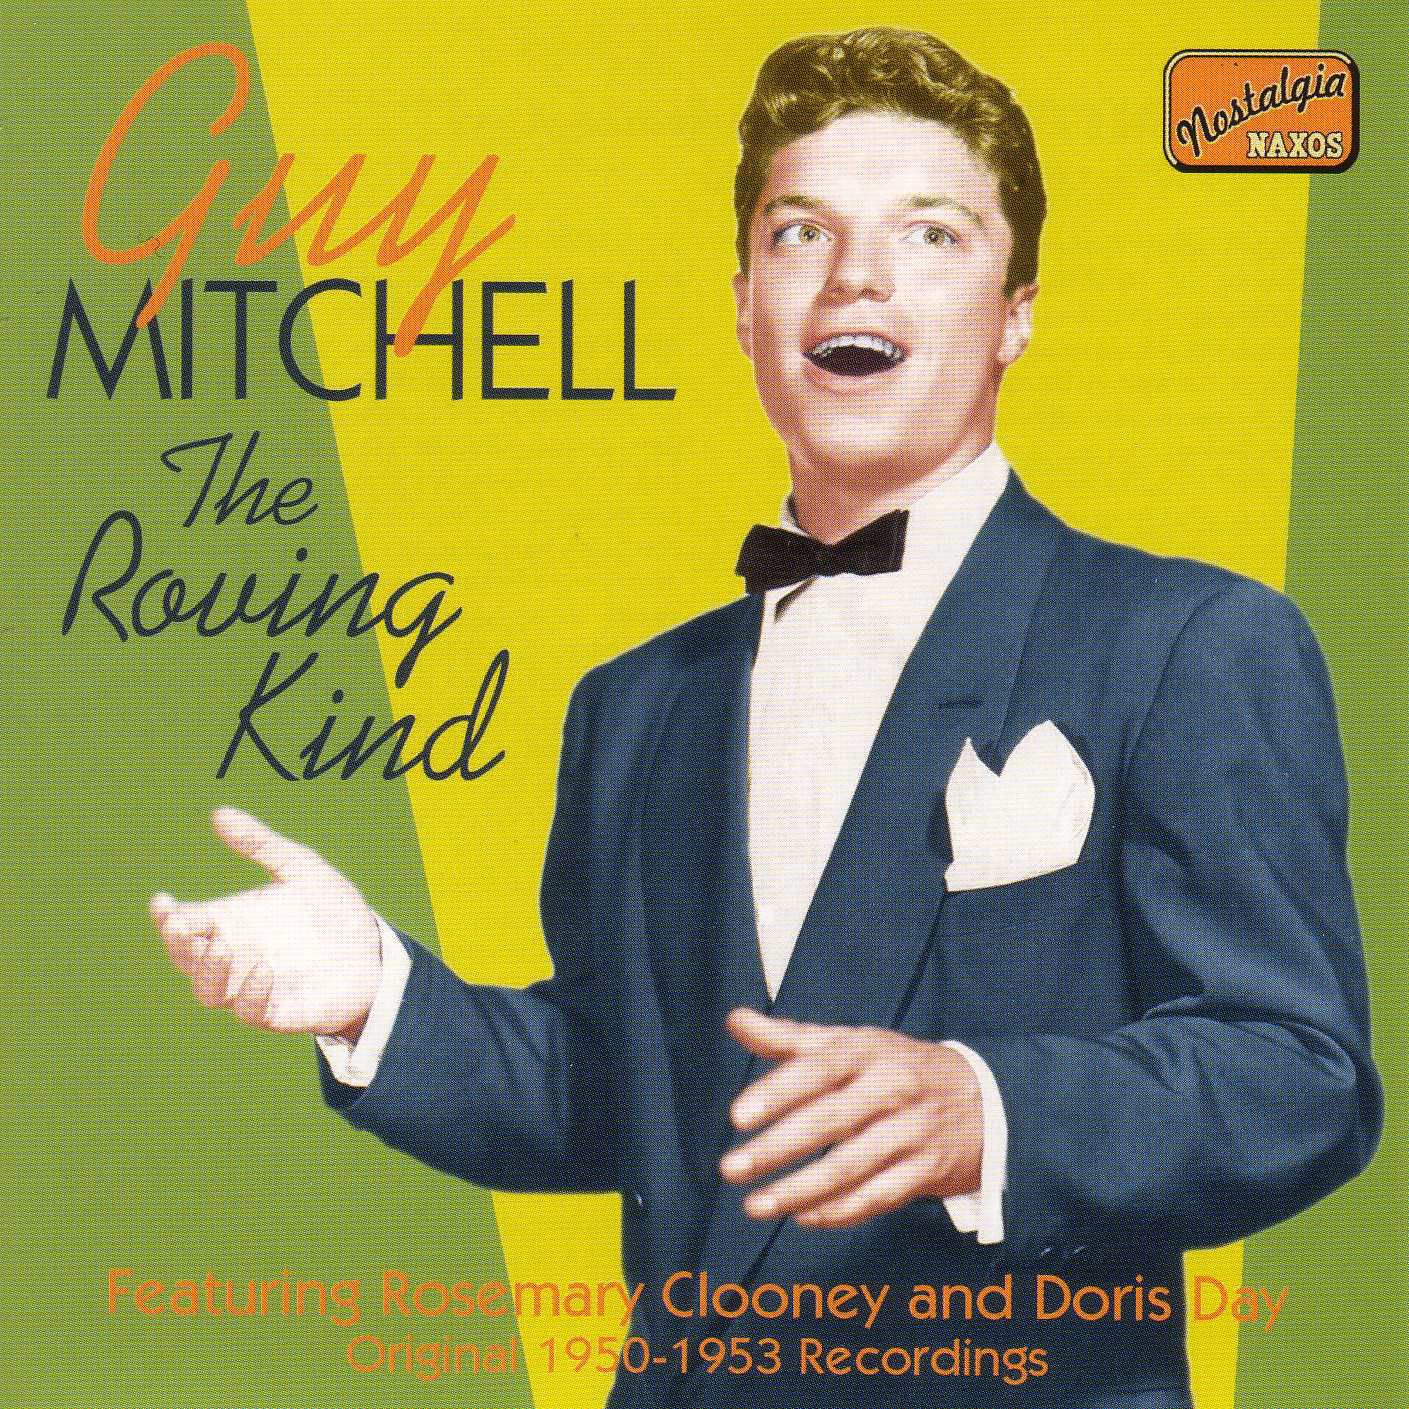 Kind guy. Guy Mitchell. Guy Mitchell старый. Mitch Miller Chorus. Guy Mitchell and Mitch Miller my truly truly Fair.